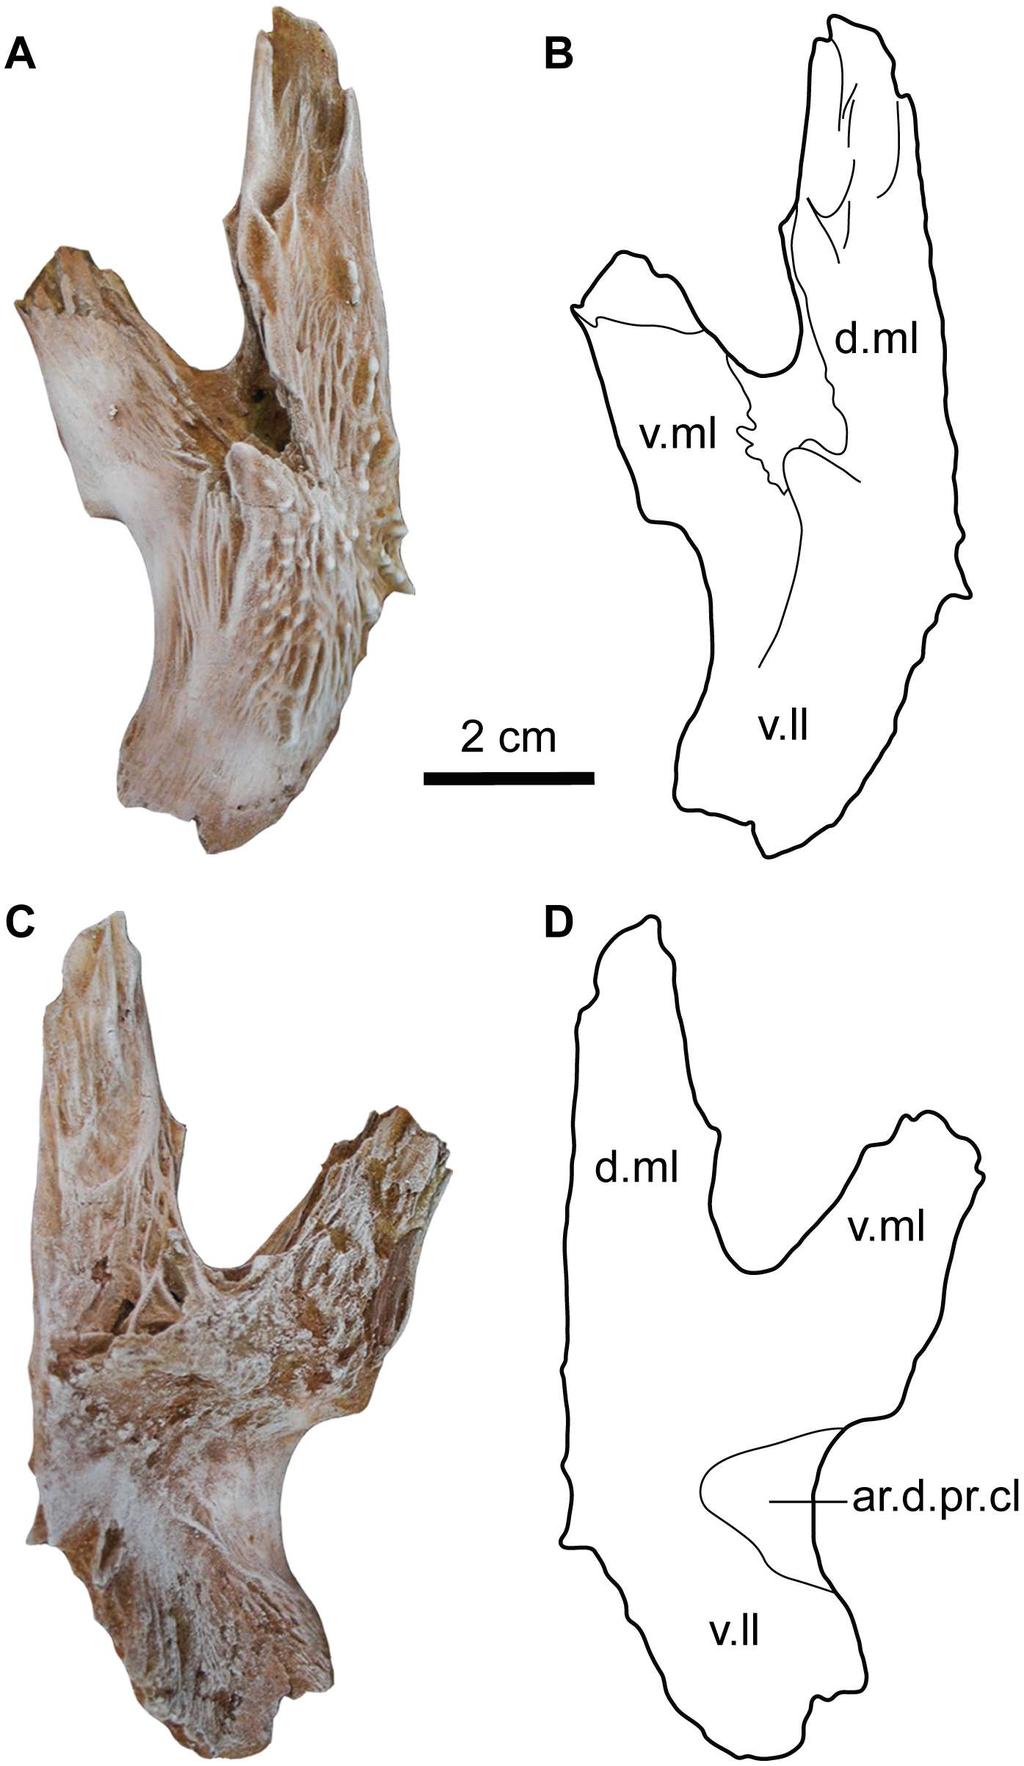 Fig 8. Left posttemporal-supracleithrum of Qarmoutus hitanensis gen. et sp. nov. Dorsal view in A, Photograph and B, Line drawing showing the anatomical features mentioned in the text.